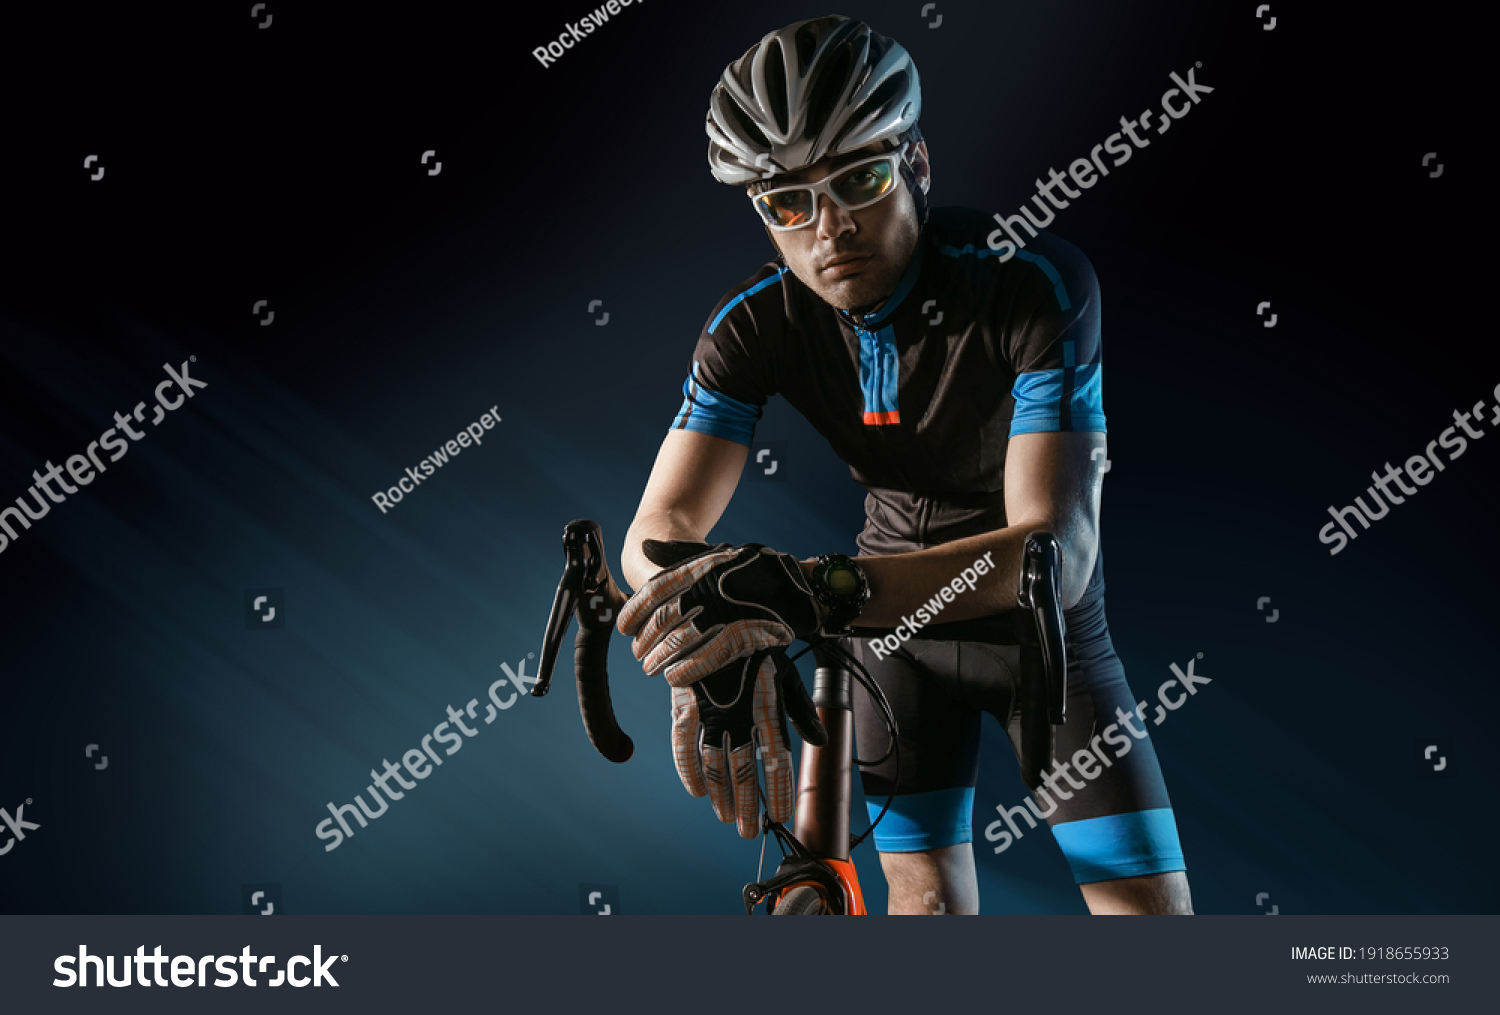 Spost background with copyspace. Cyclist. Dramatic colorful close-up portrait. #1918655933